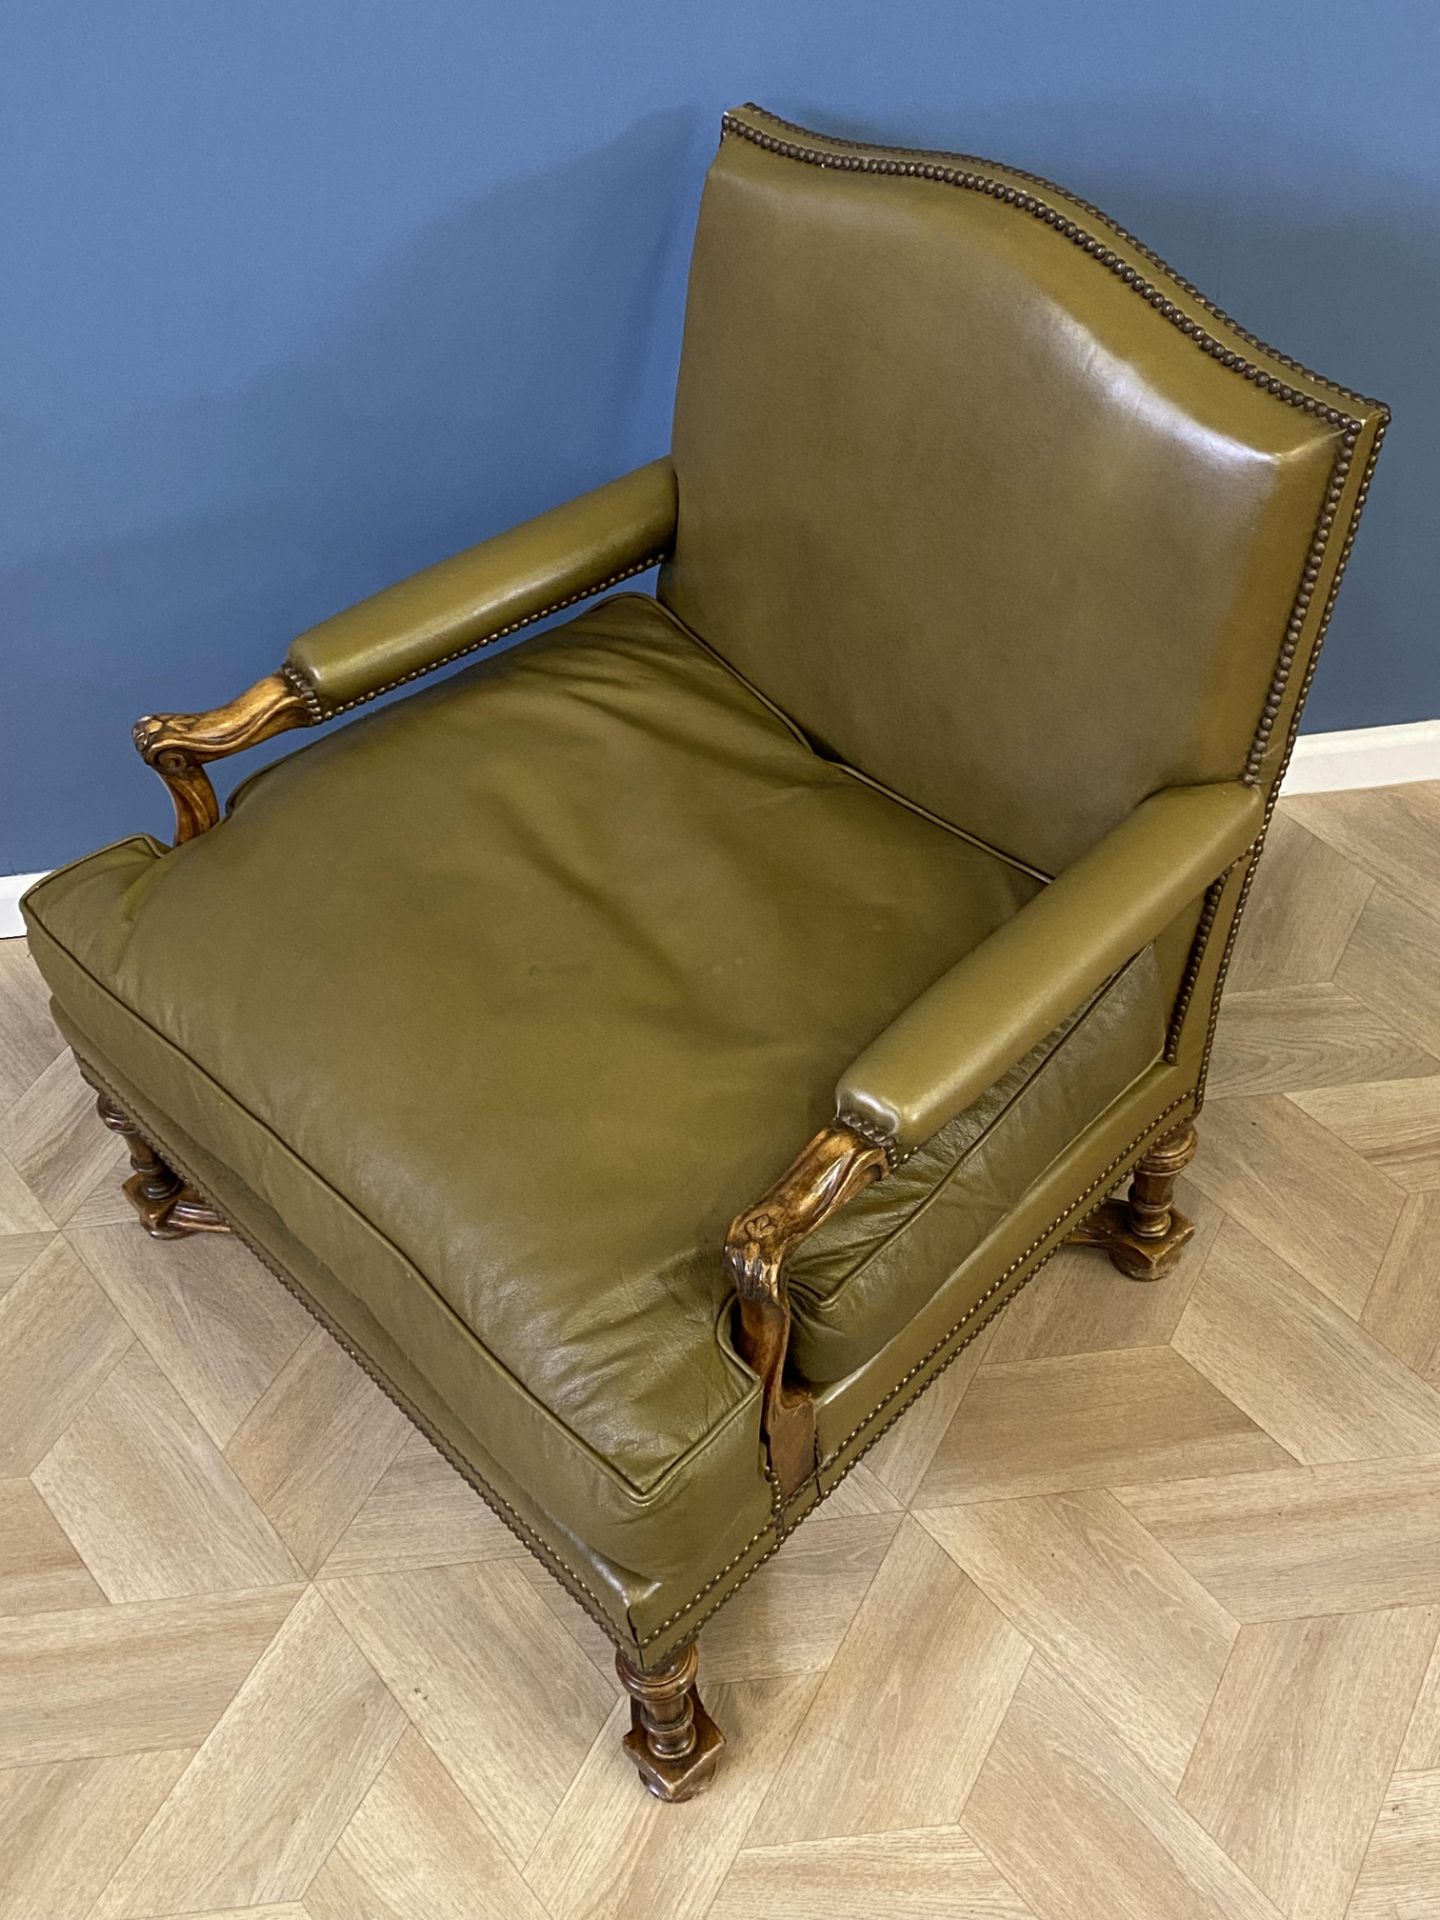 Pair of green leather armchairs - Image 9 of 12